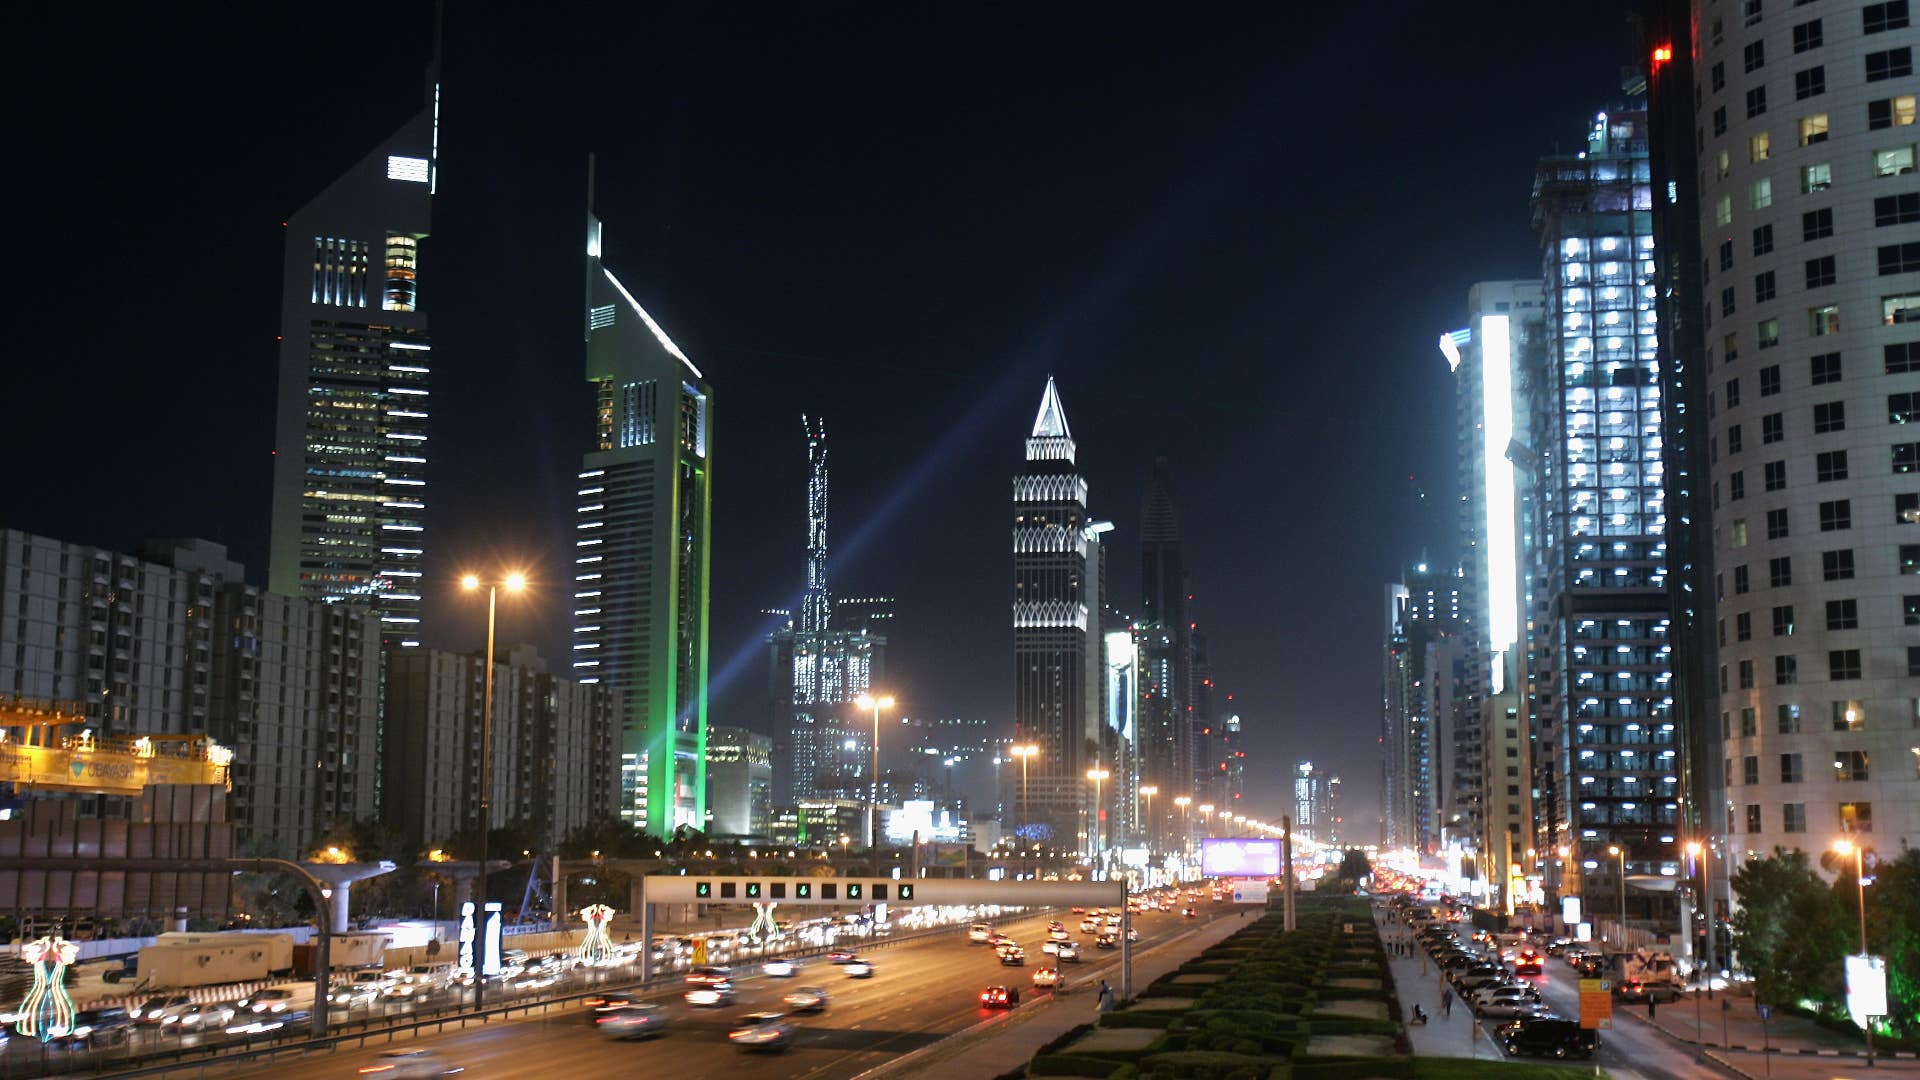 The iconic Emirates Towers dominate the skyline beside the wide boulevard of Sheikh Zayed Road.